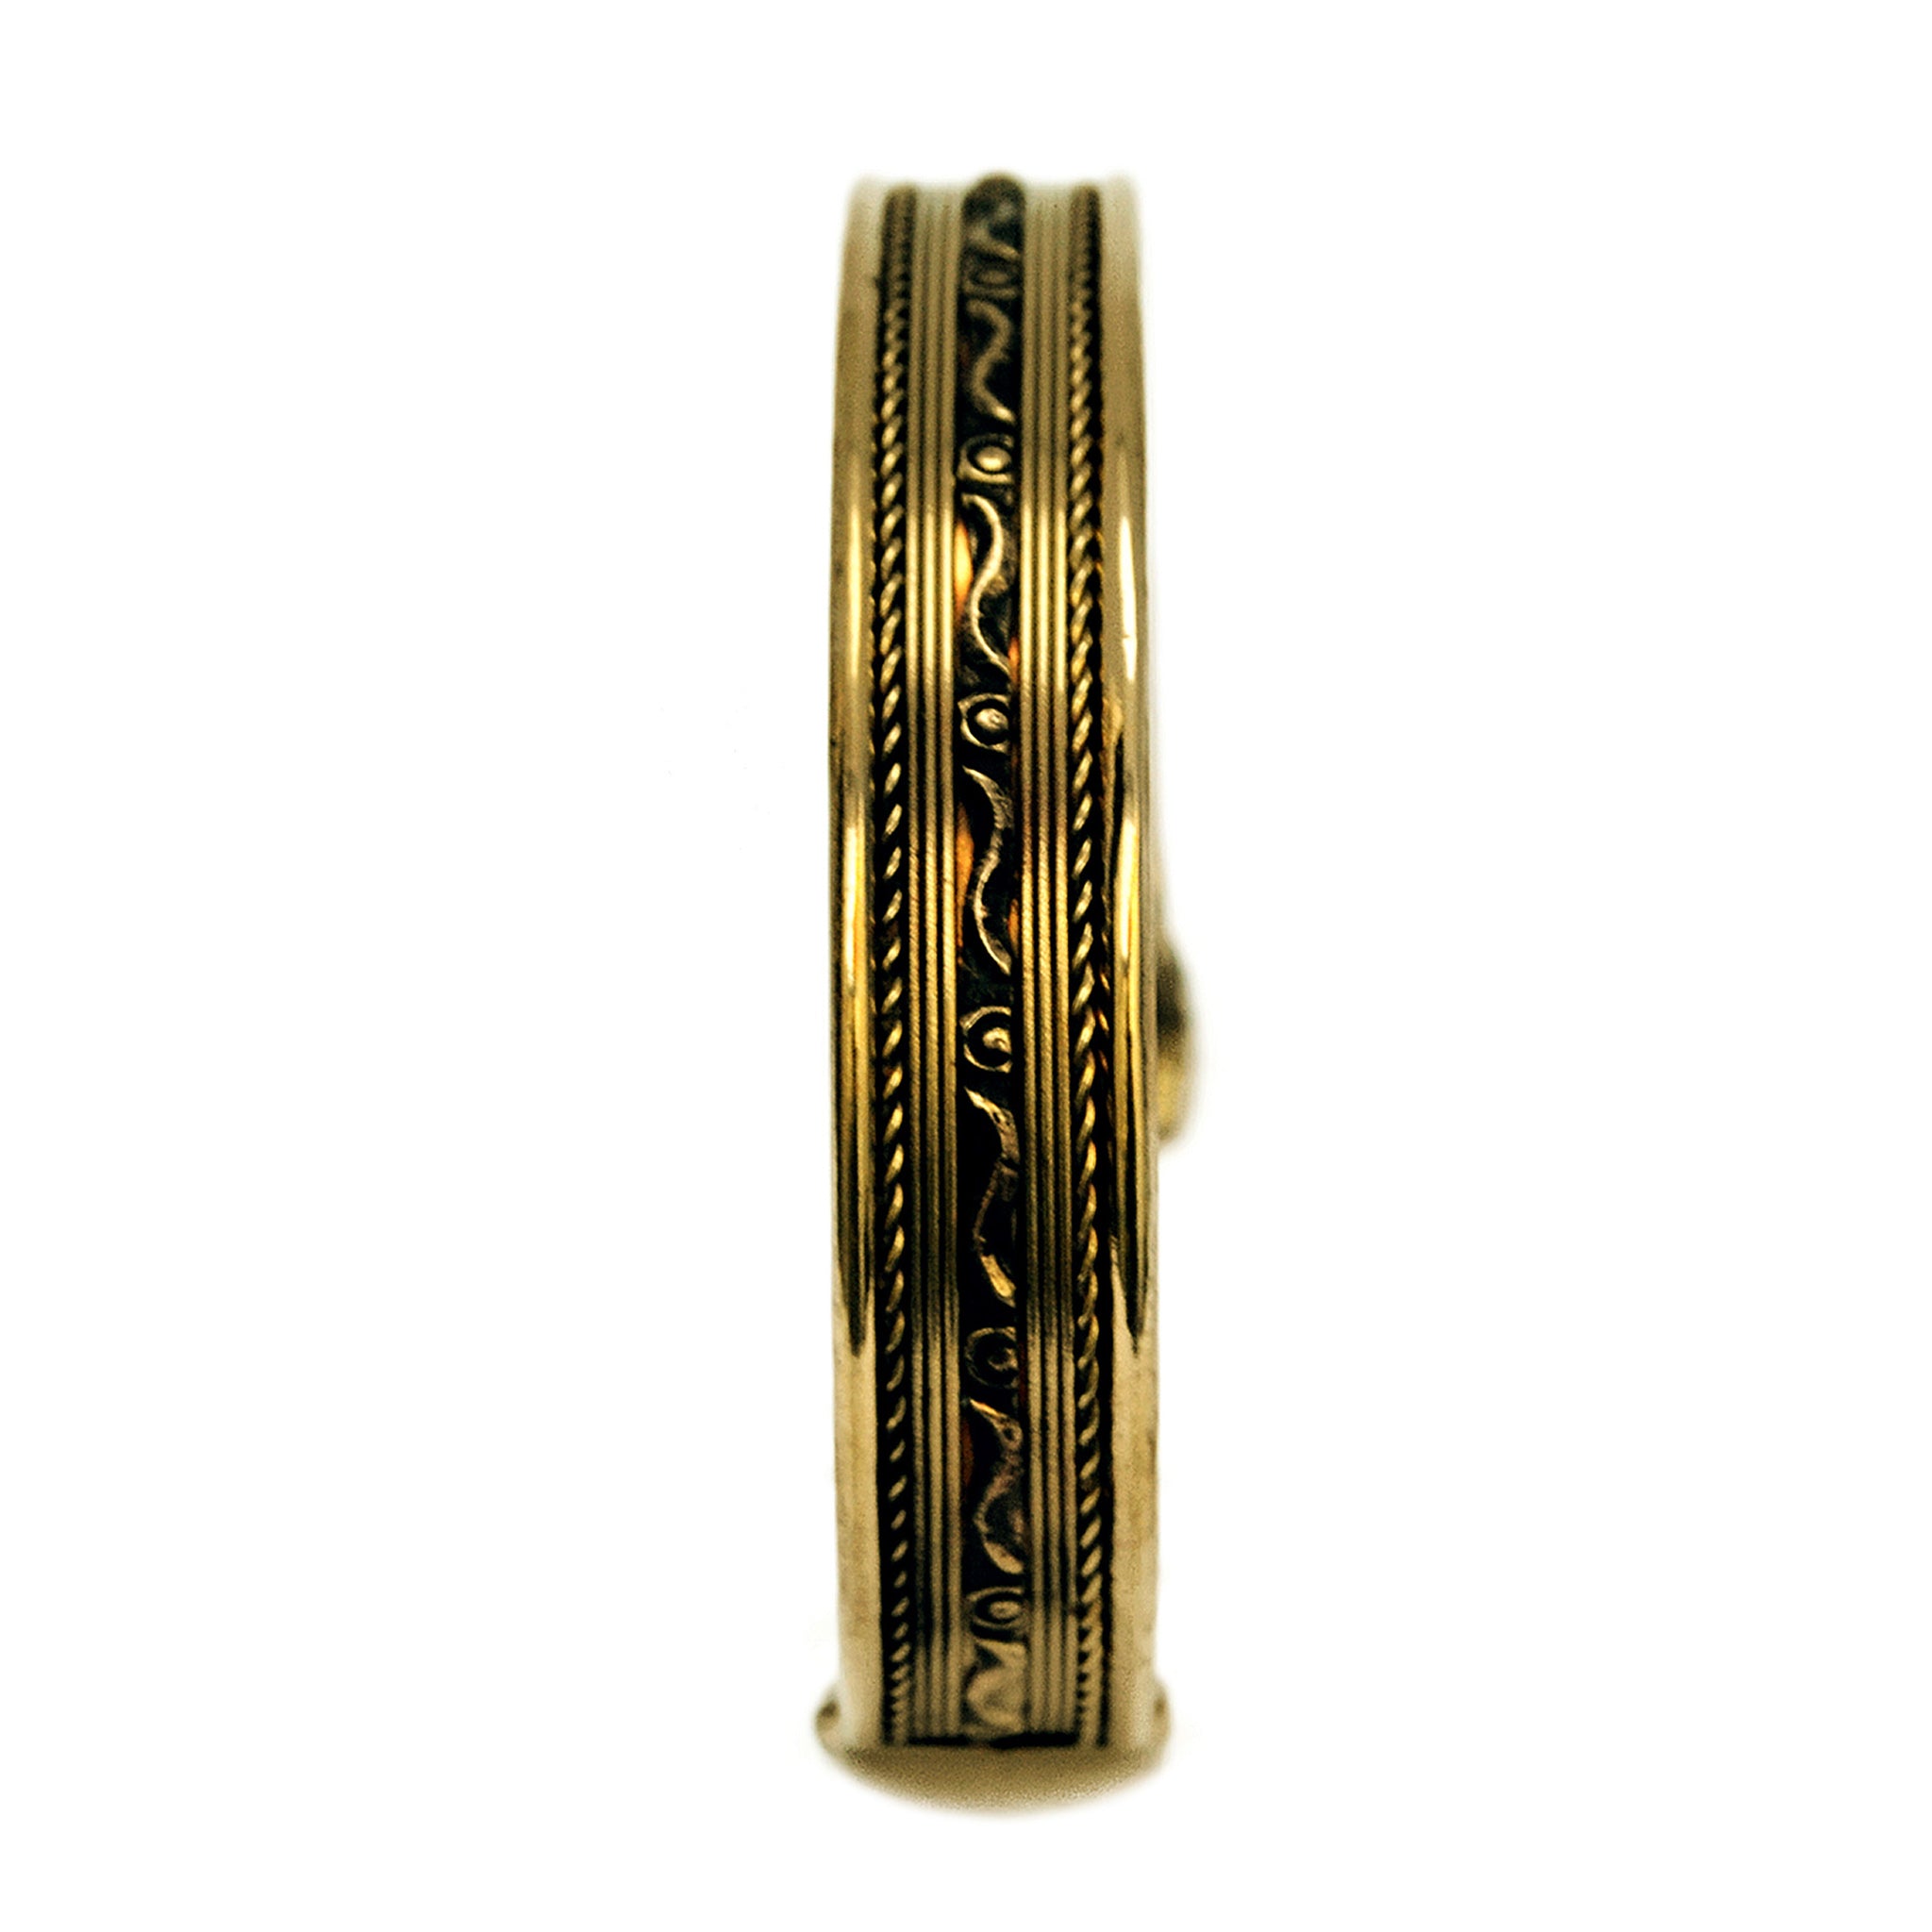 Gypsy indian cuff bracelet in gold color